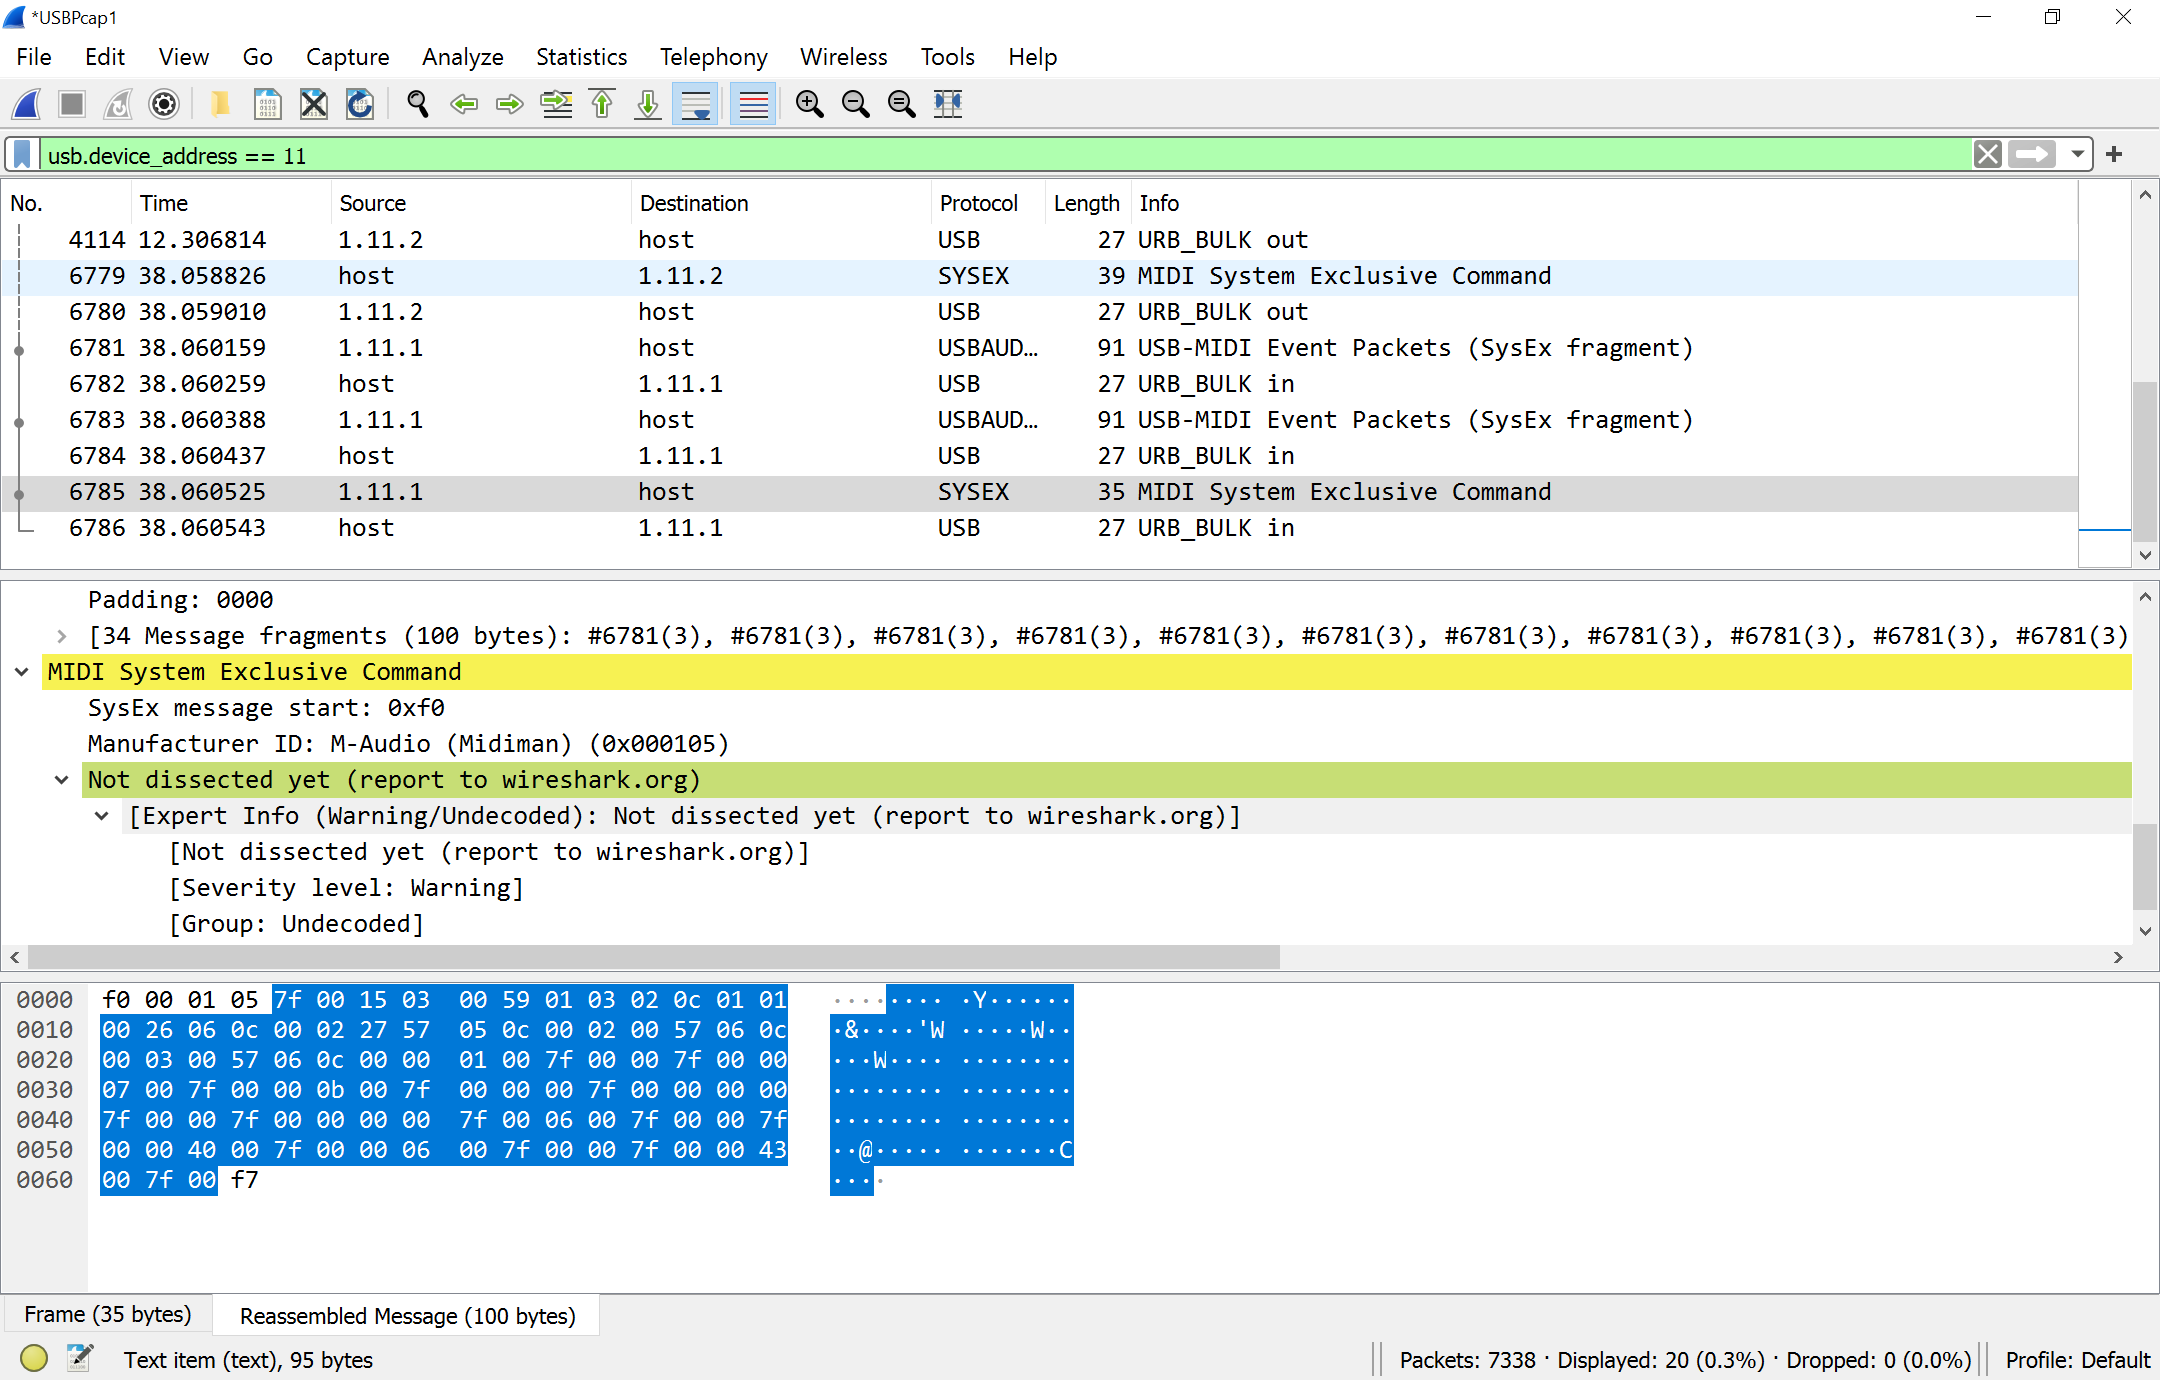 wireshark window, with a longer response, containing the same data as before